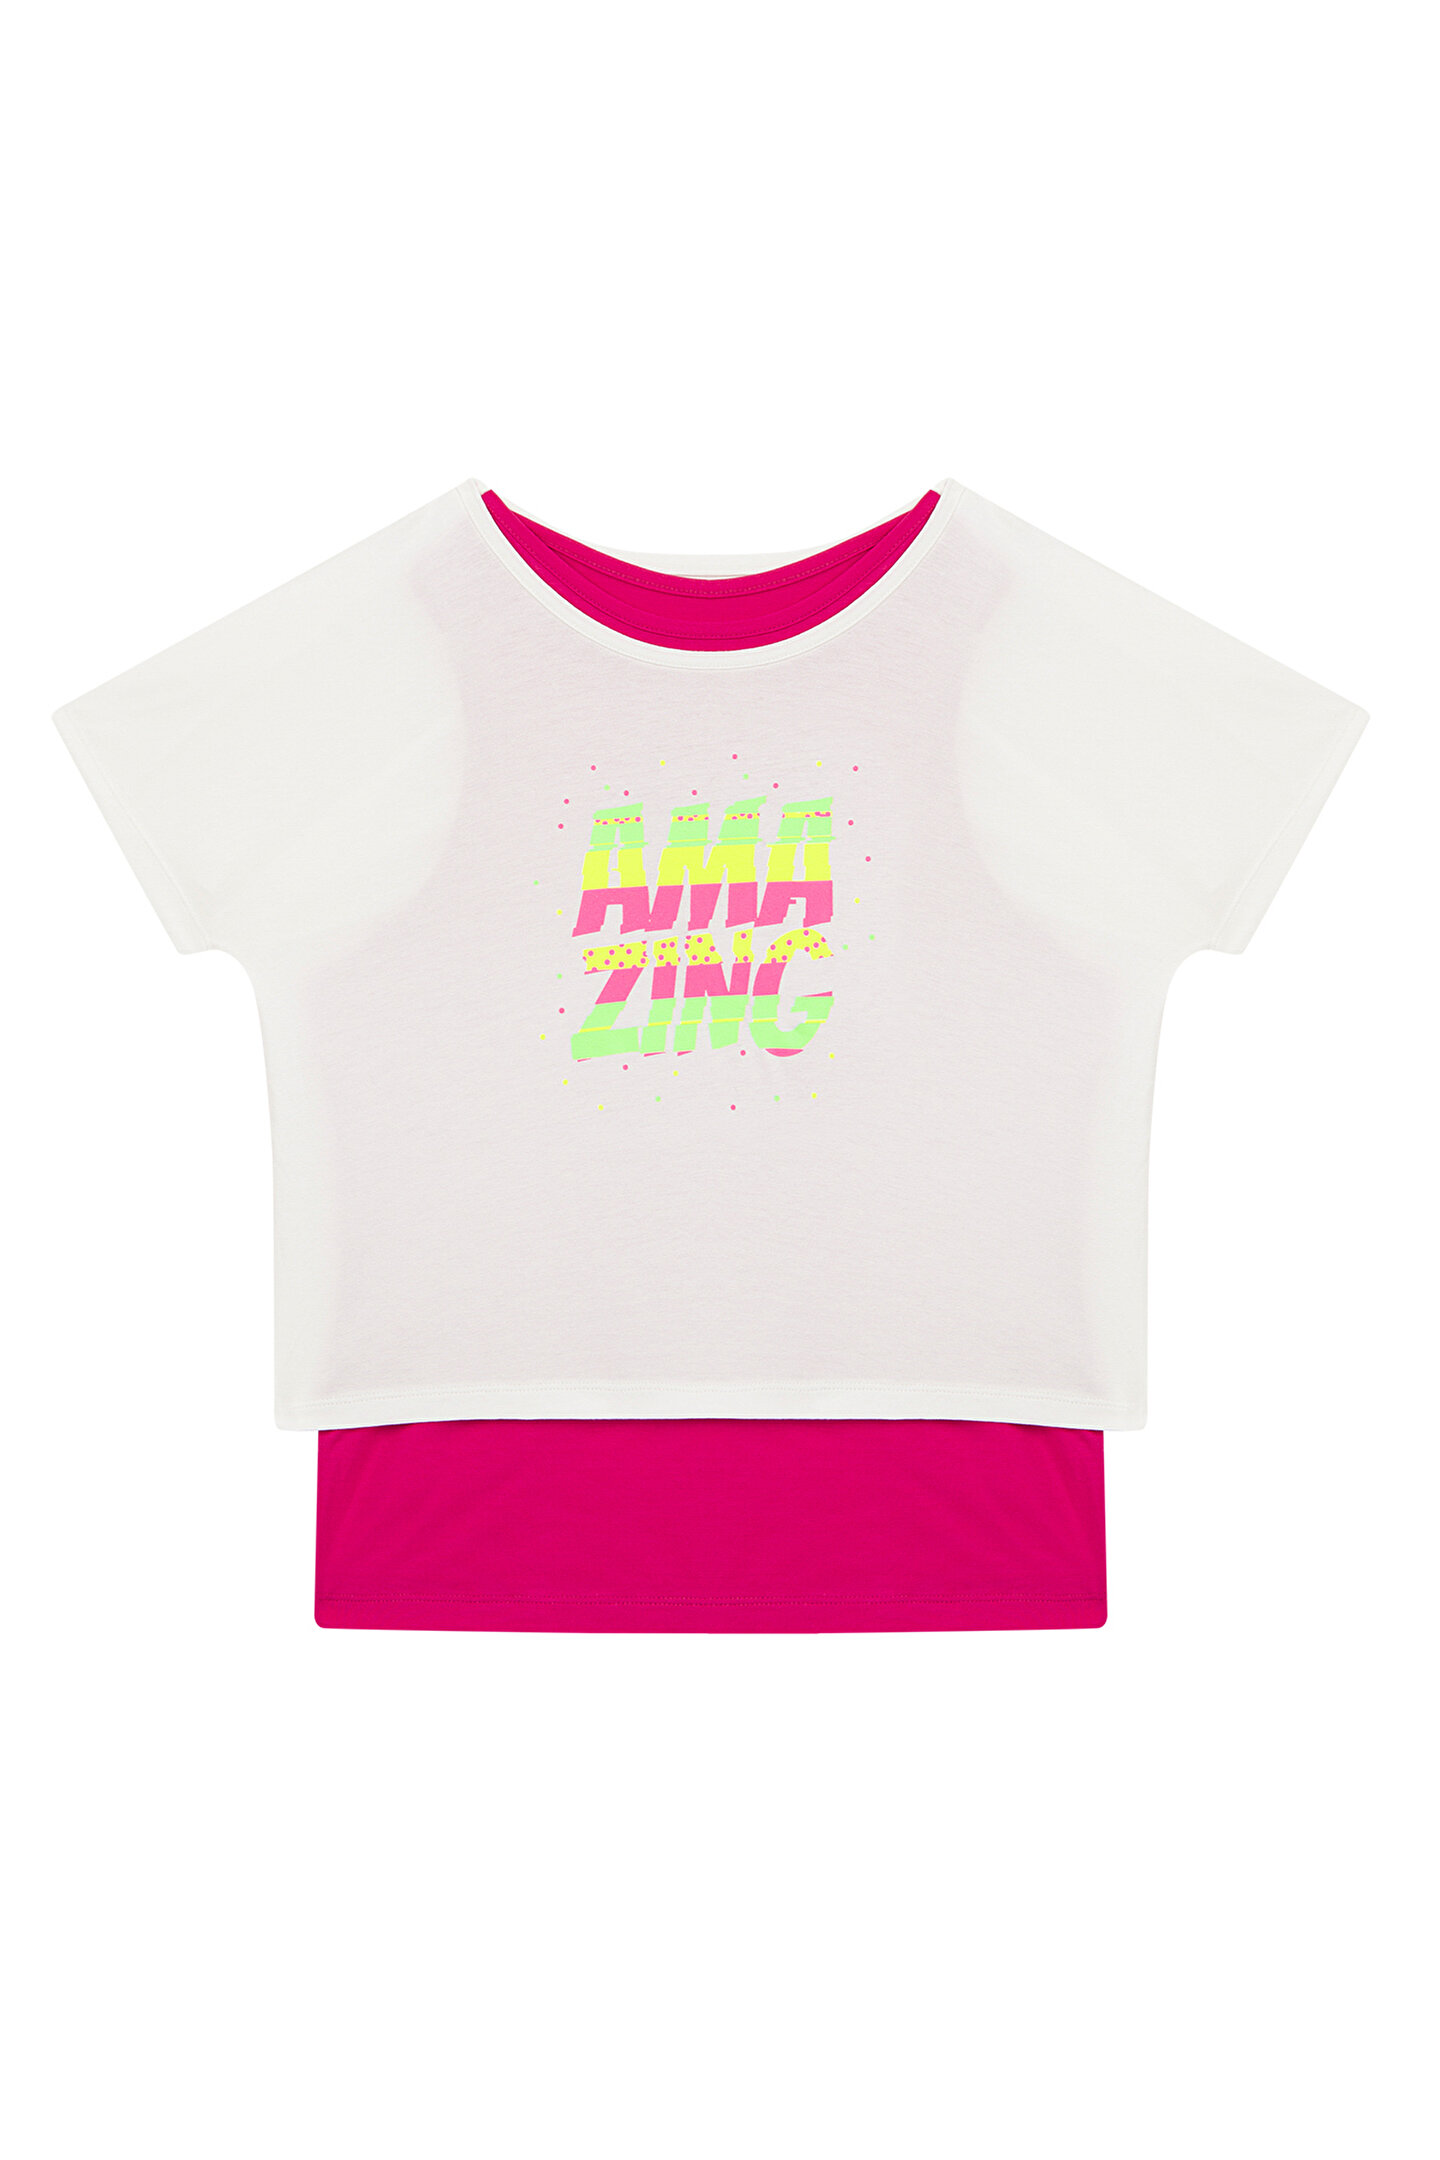 NEON DOUBLE T-SHIRT, 5-6, PINK-WHITE